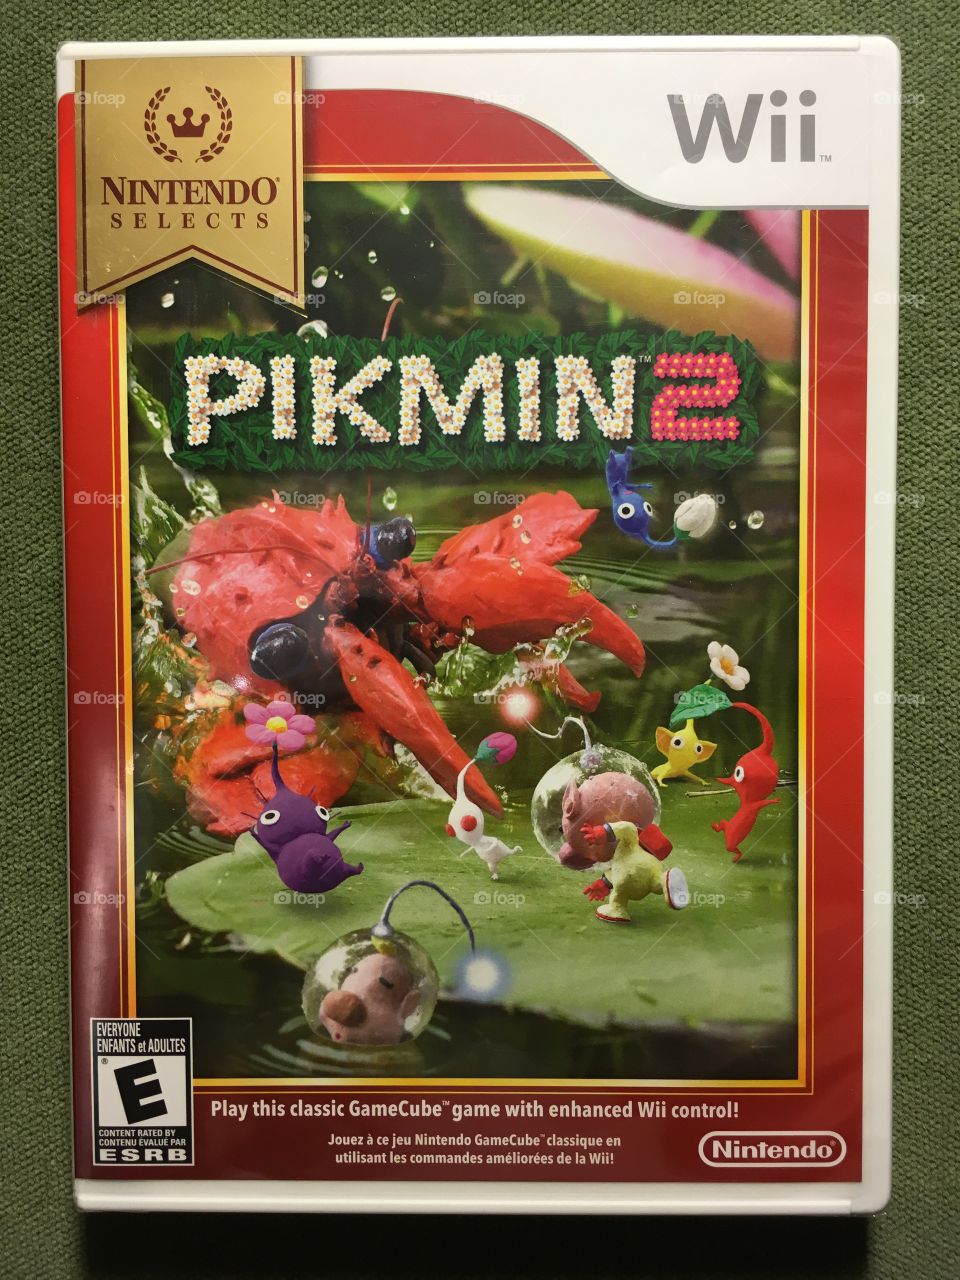 Pikmin 2 
Video game for Nintendo Wii
Brand New Sealed
Released - 2012